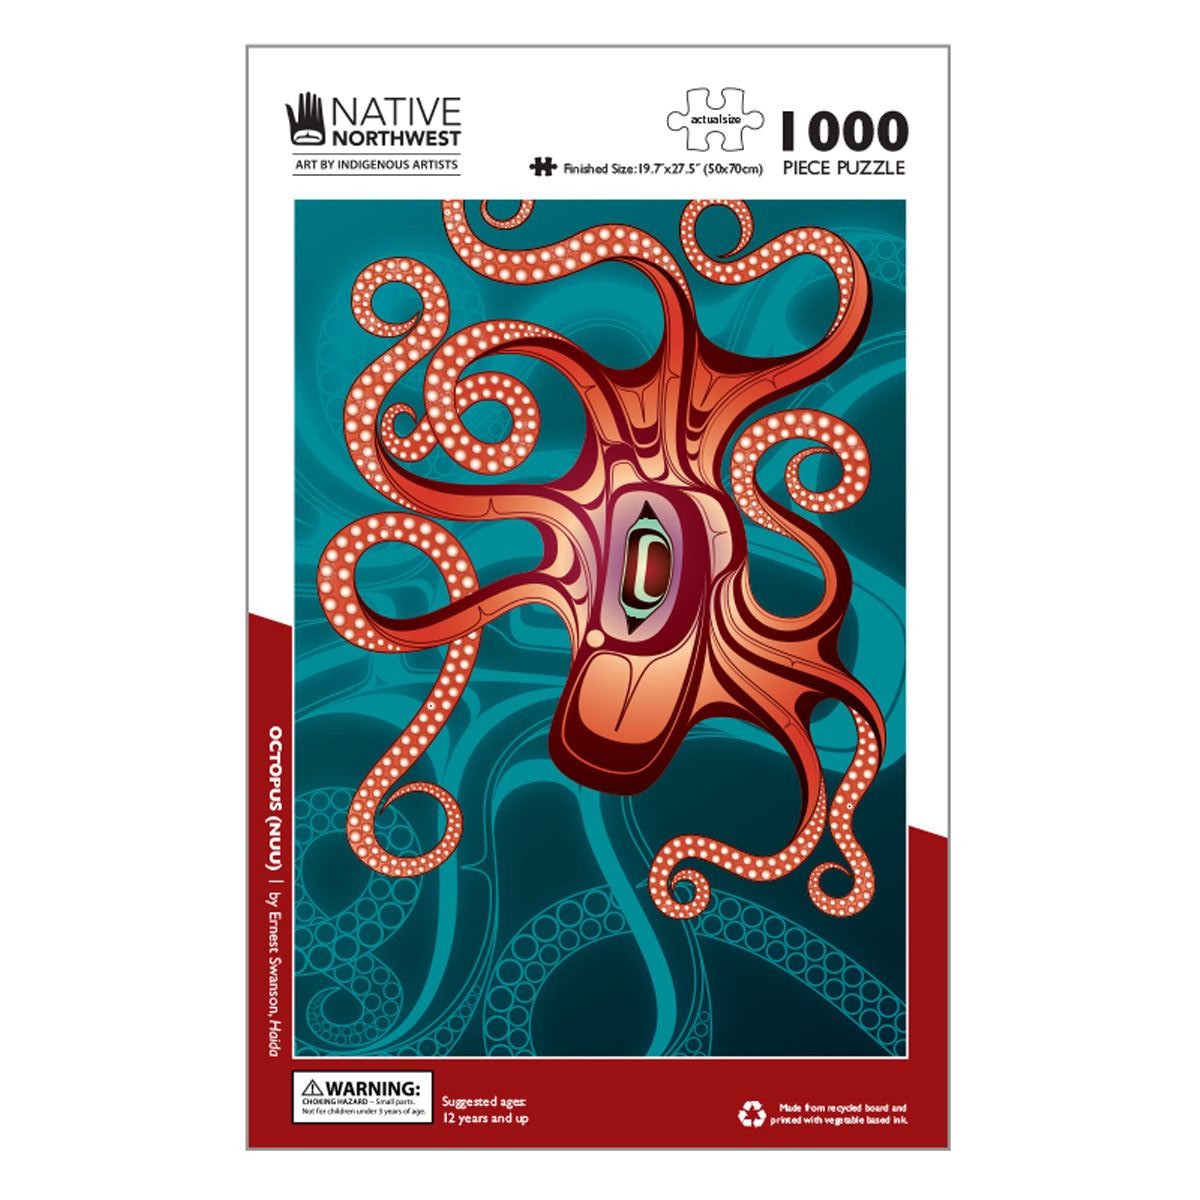 Octopus (NUU) Puzzle by Ernest Swanson